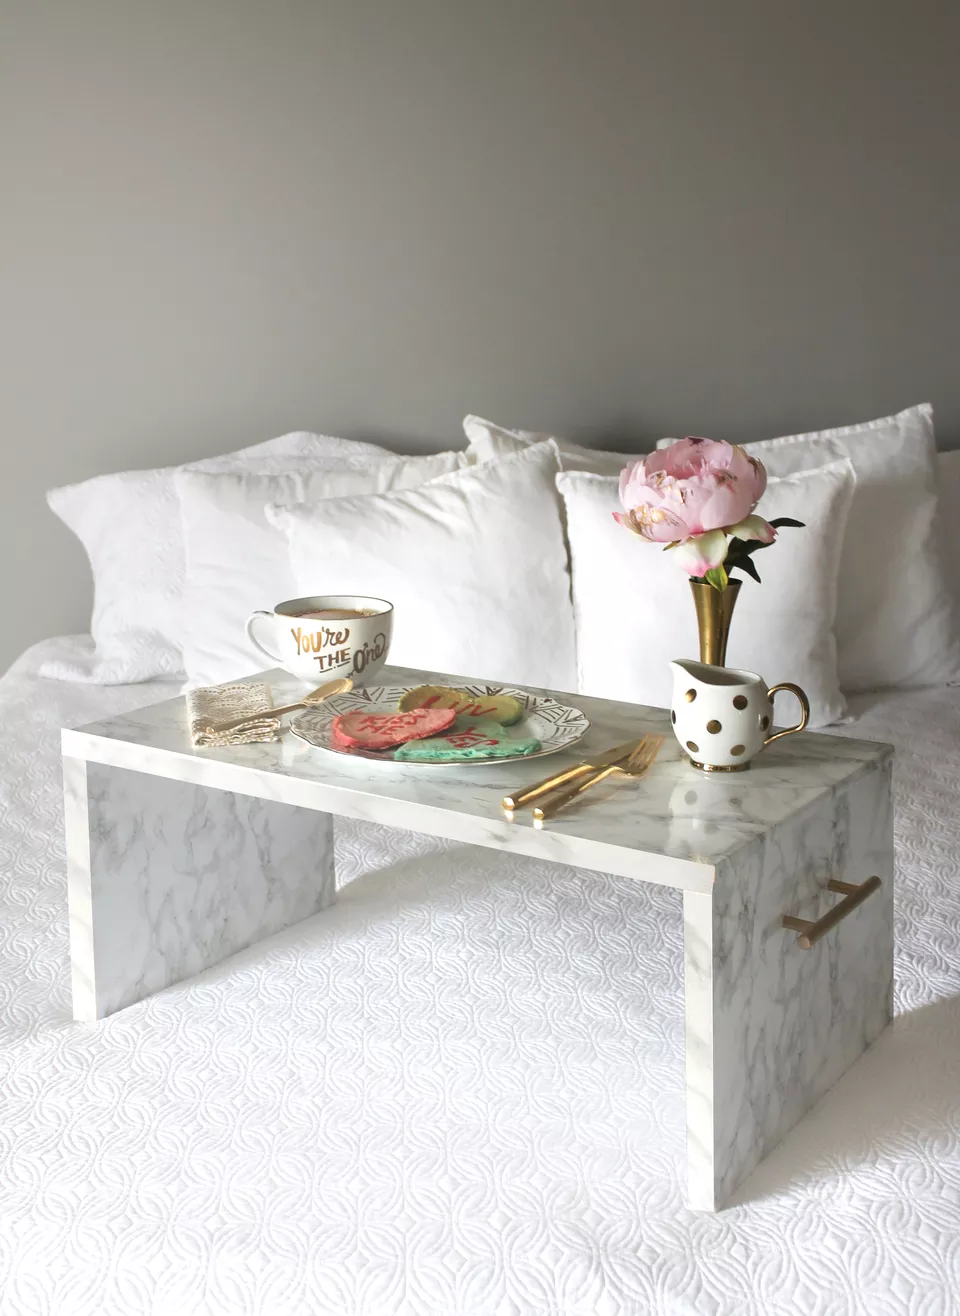 Bedroom decor projects to DIY